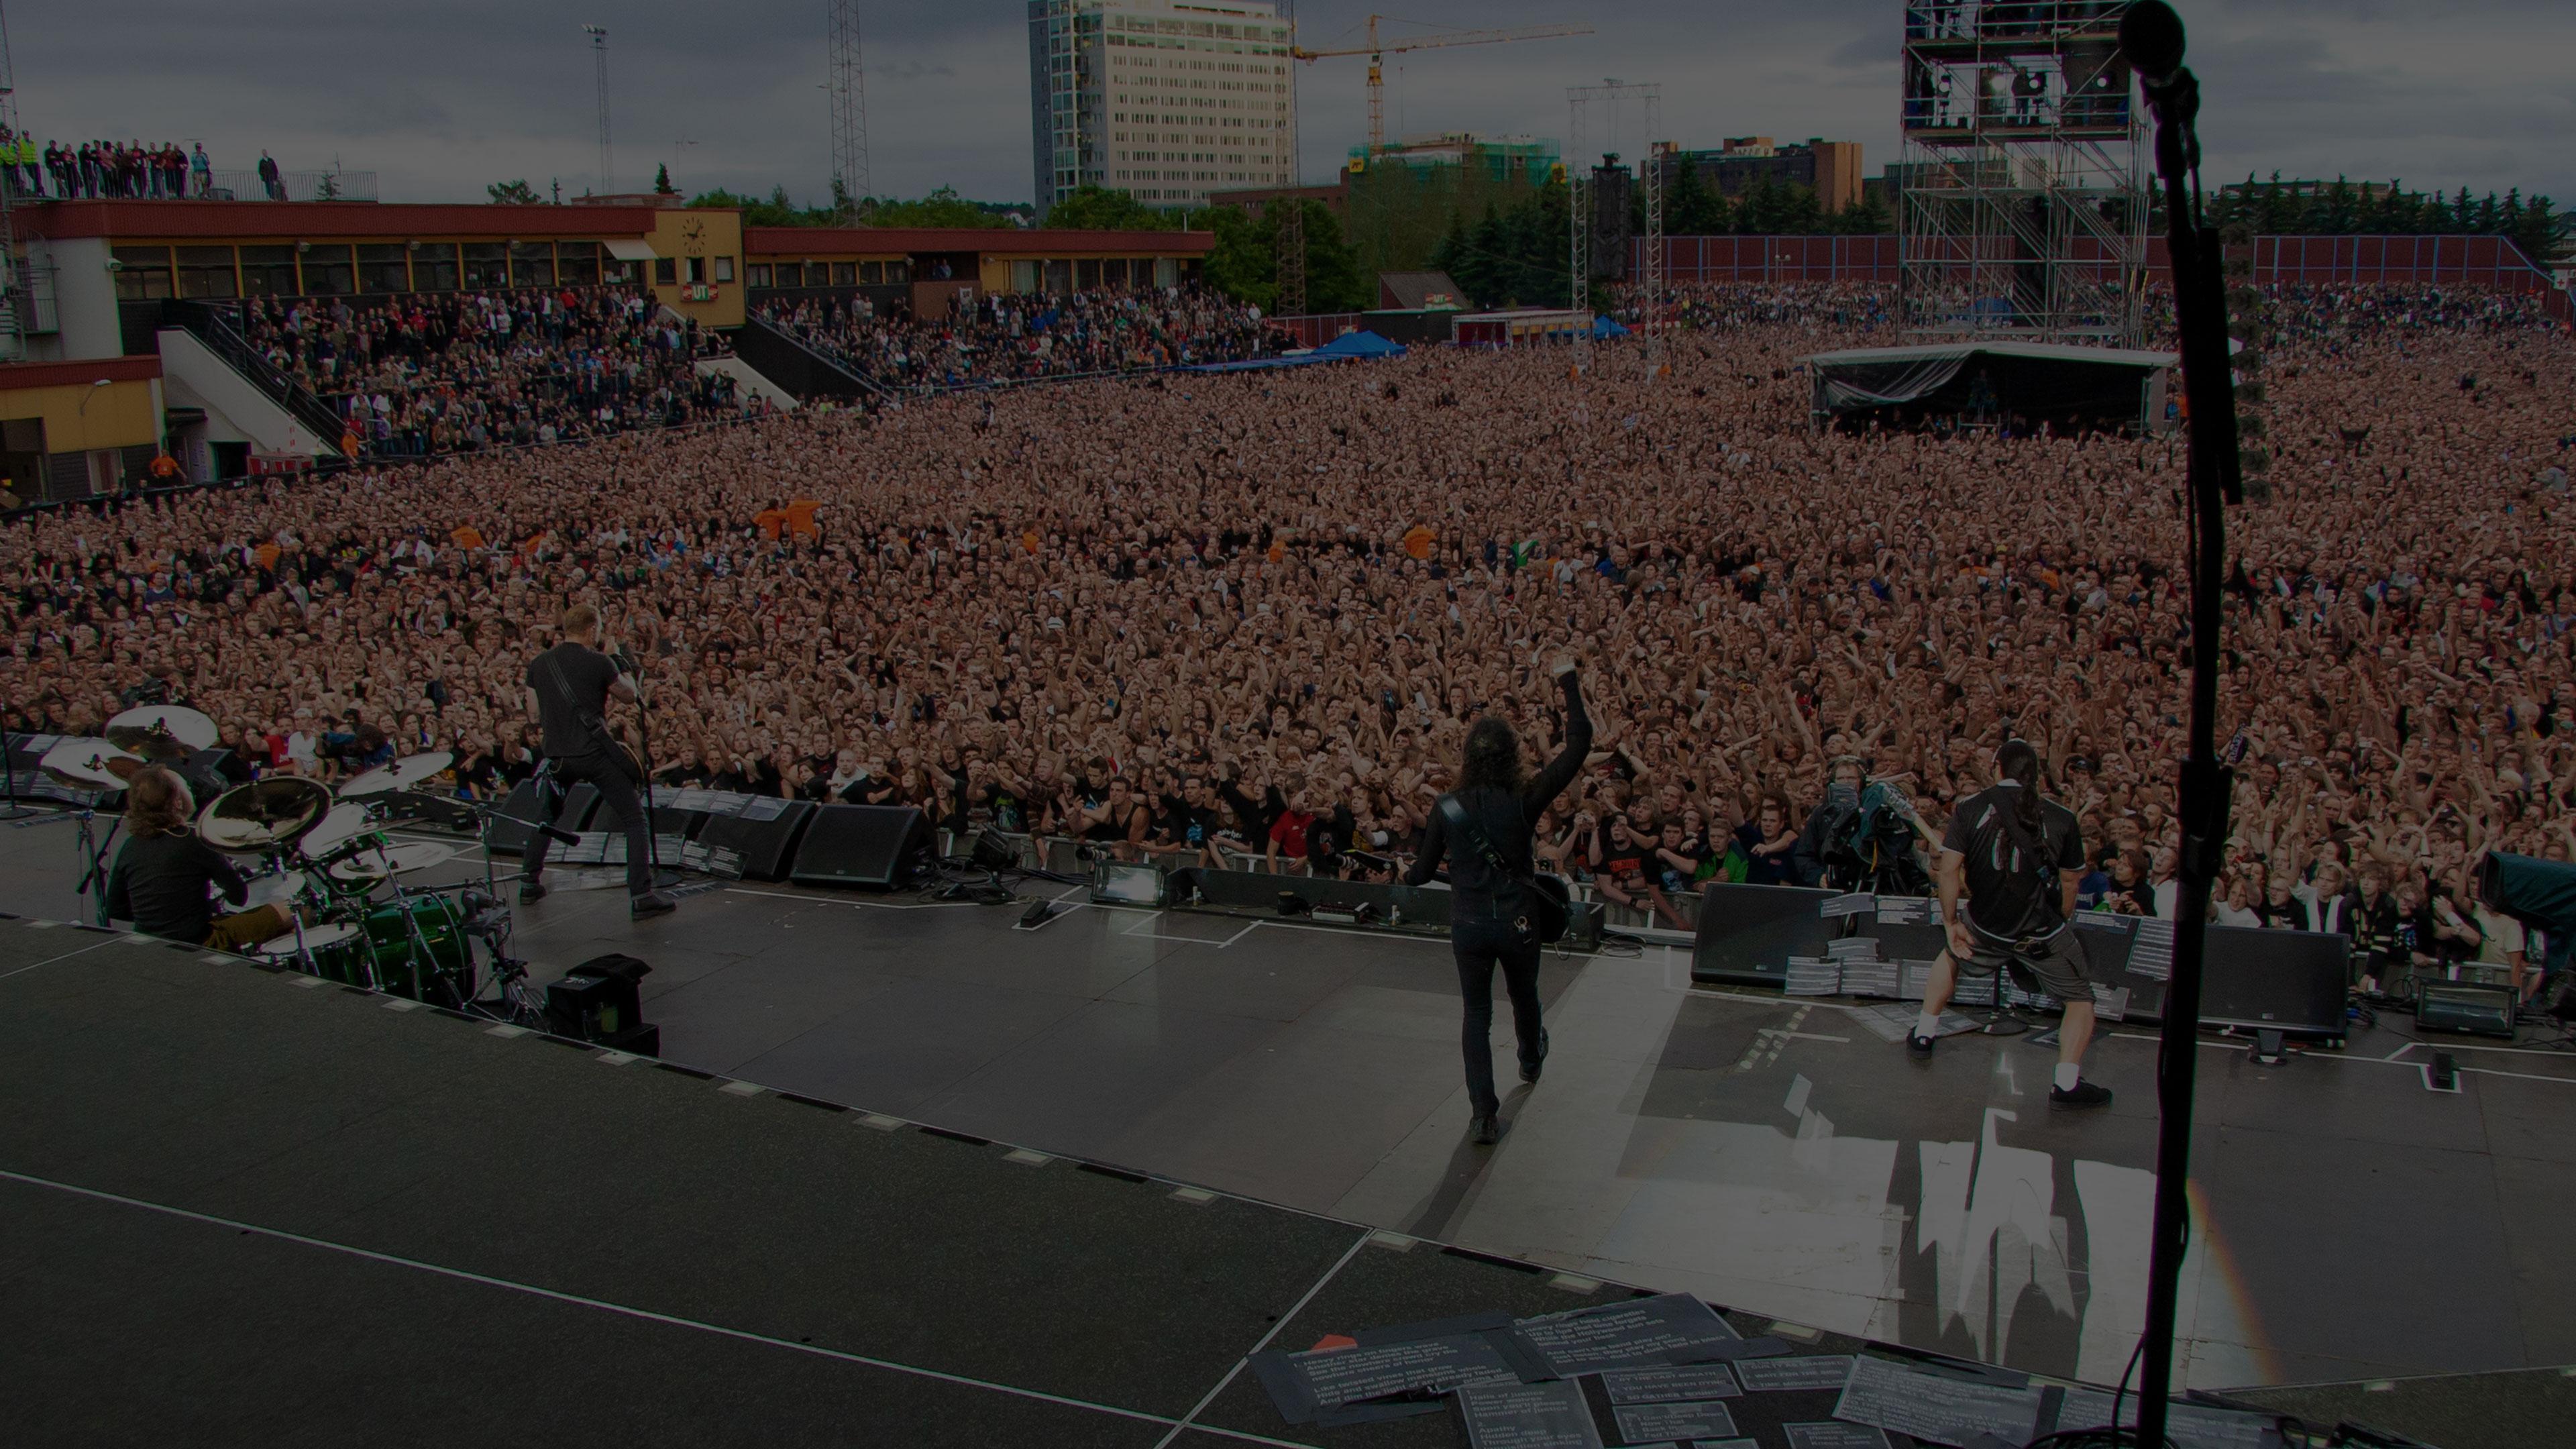 Metallica at Valle Hovin in Oslo, Norway on July 10, 2007